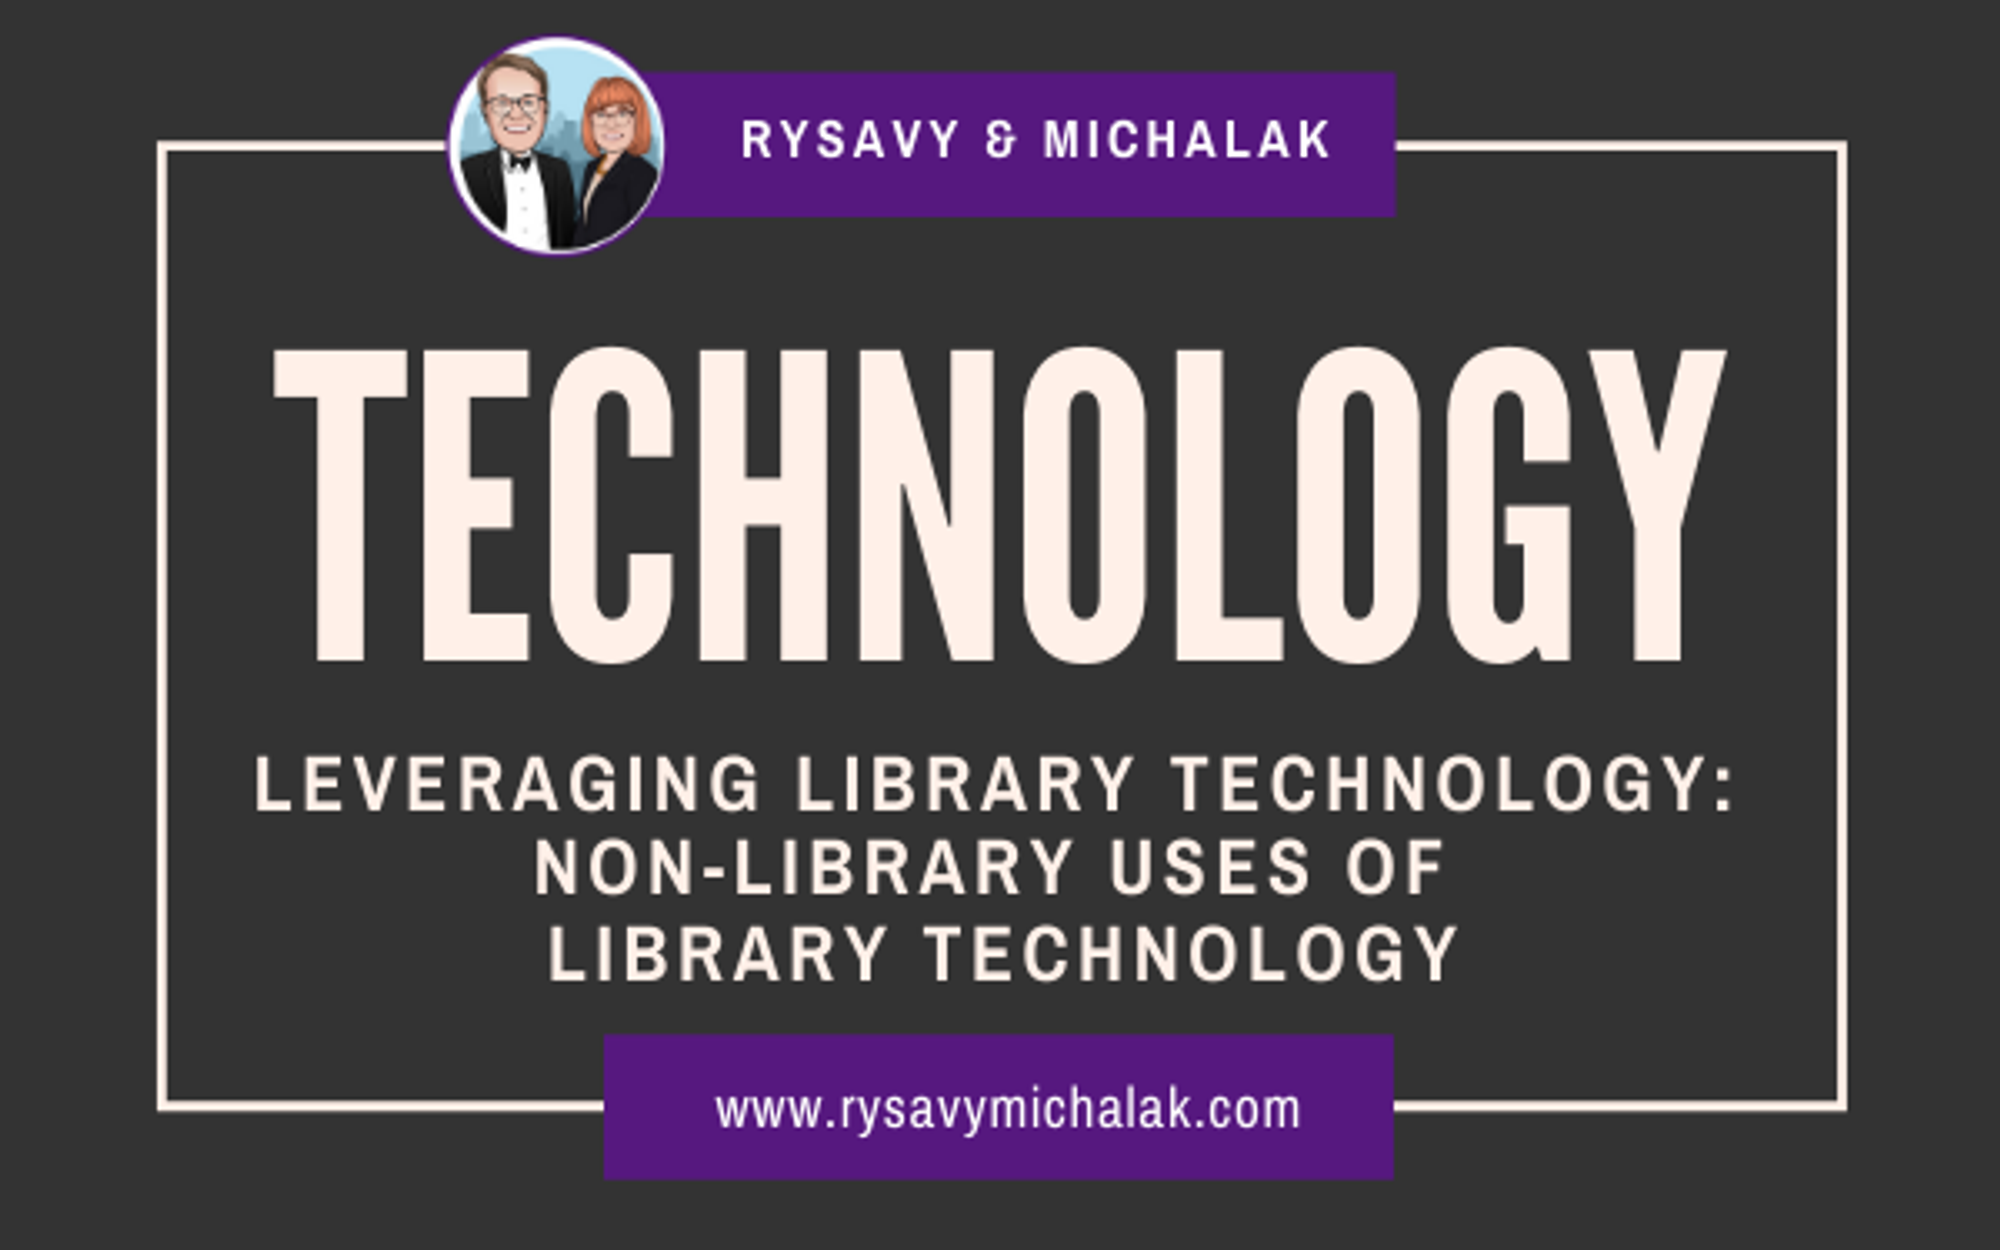 Leveraging Library Technology: Non-Library Uses of Library Technology